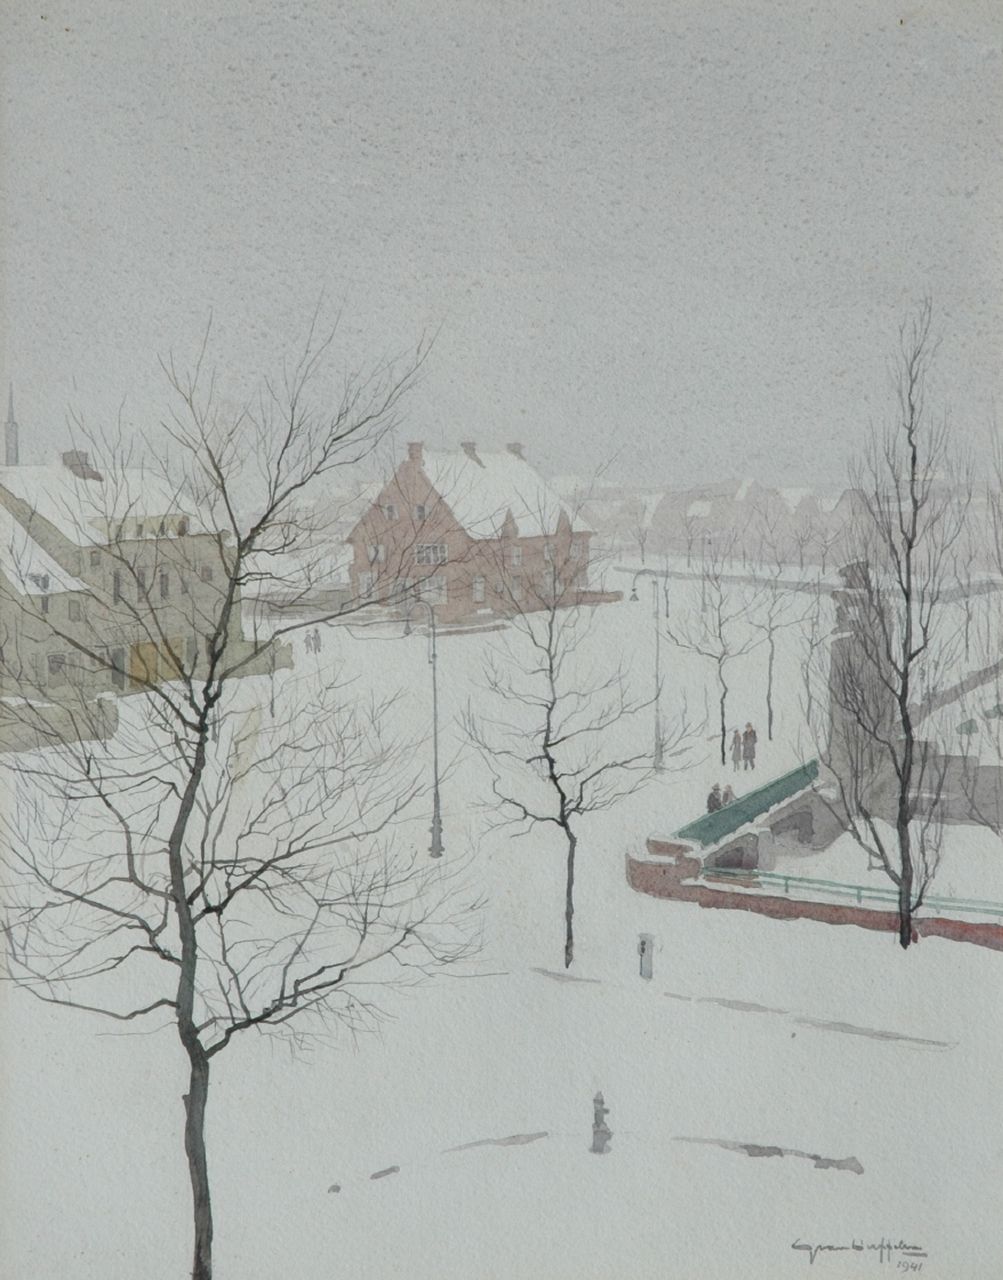 Duffelen G. van | Gerrit van Duffelen, A view of South Amsterdam in the snow, watercolour on paper 46.5 x 37.7 cm, signed l.r. and dated 1941